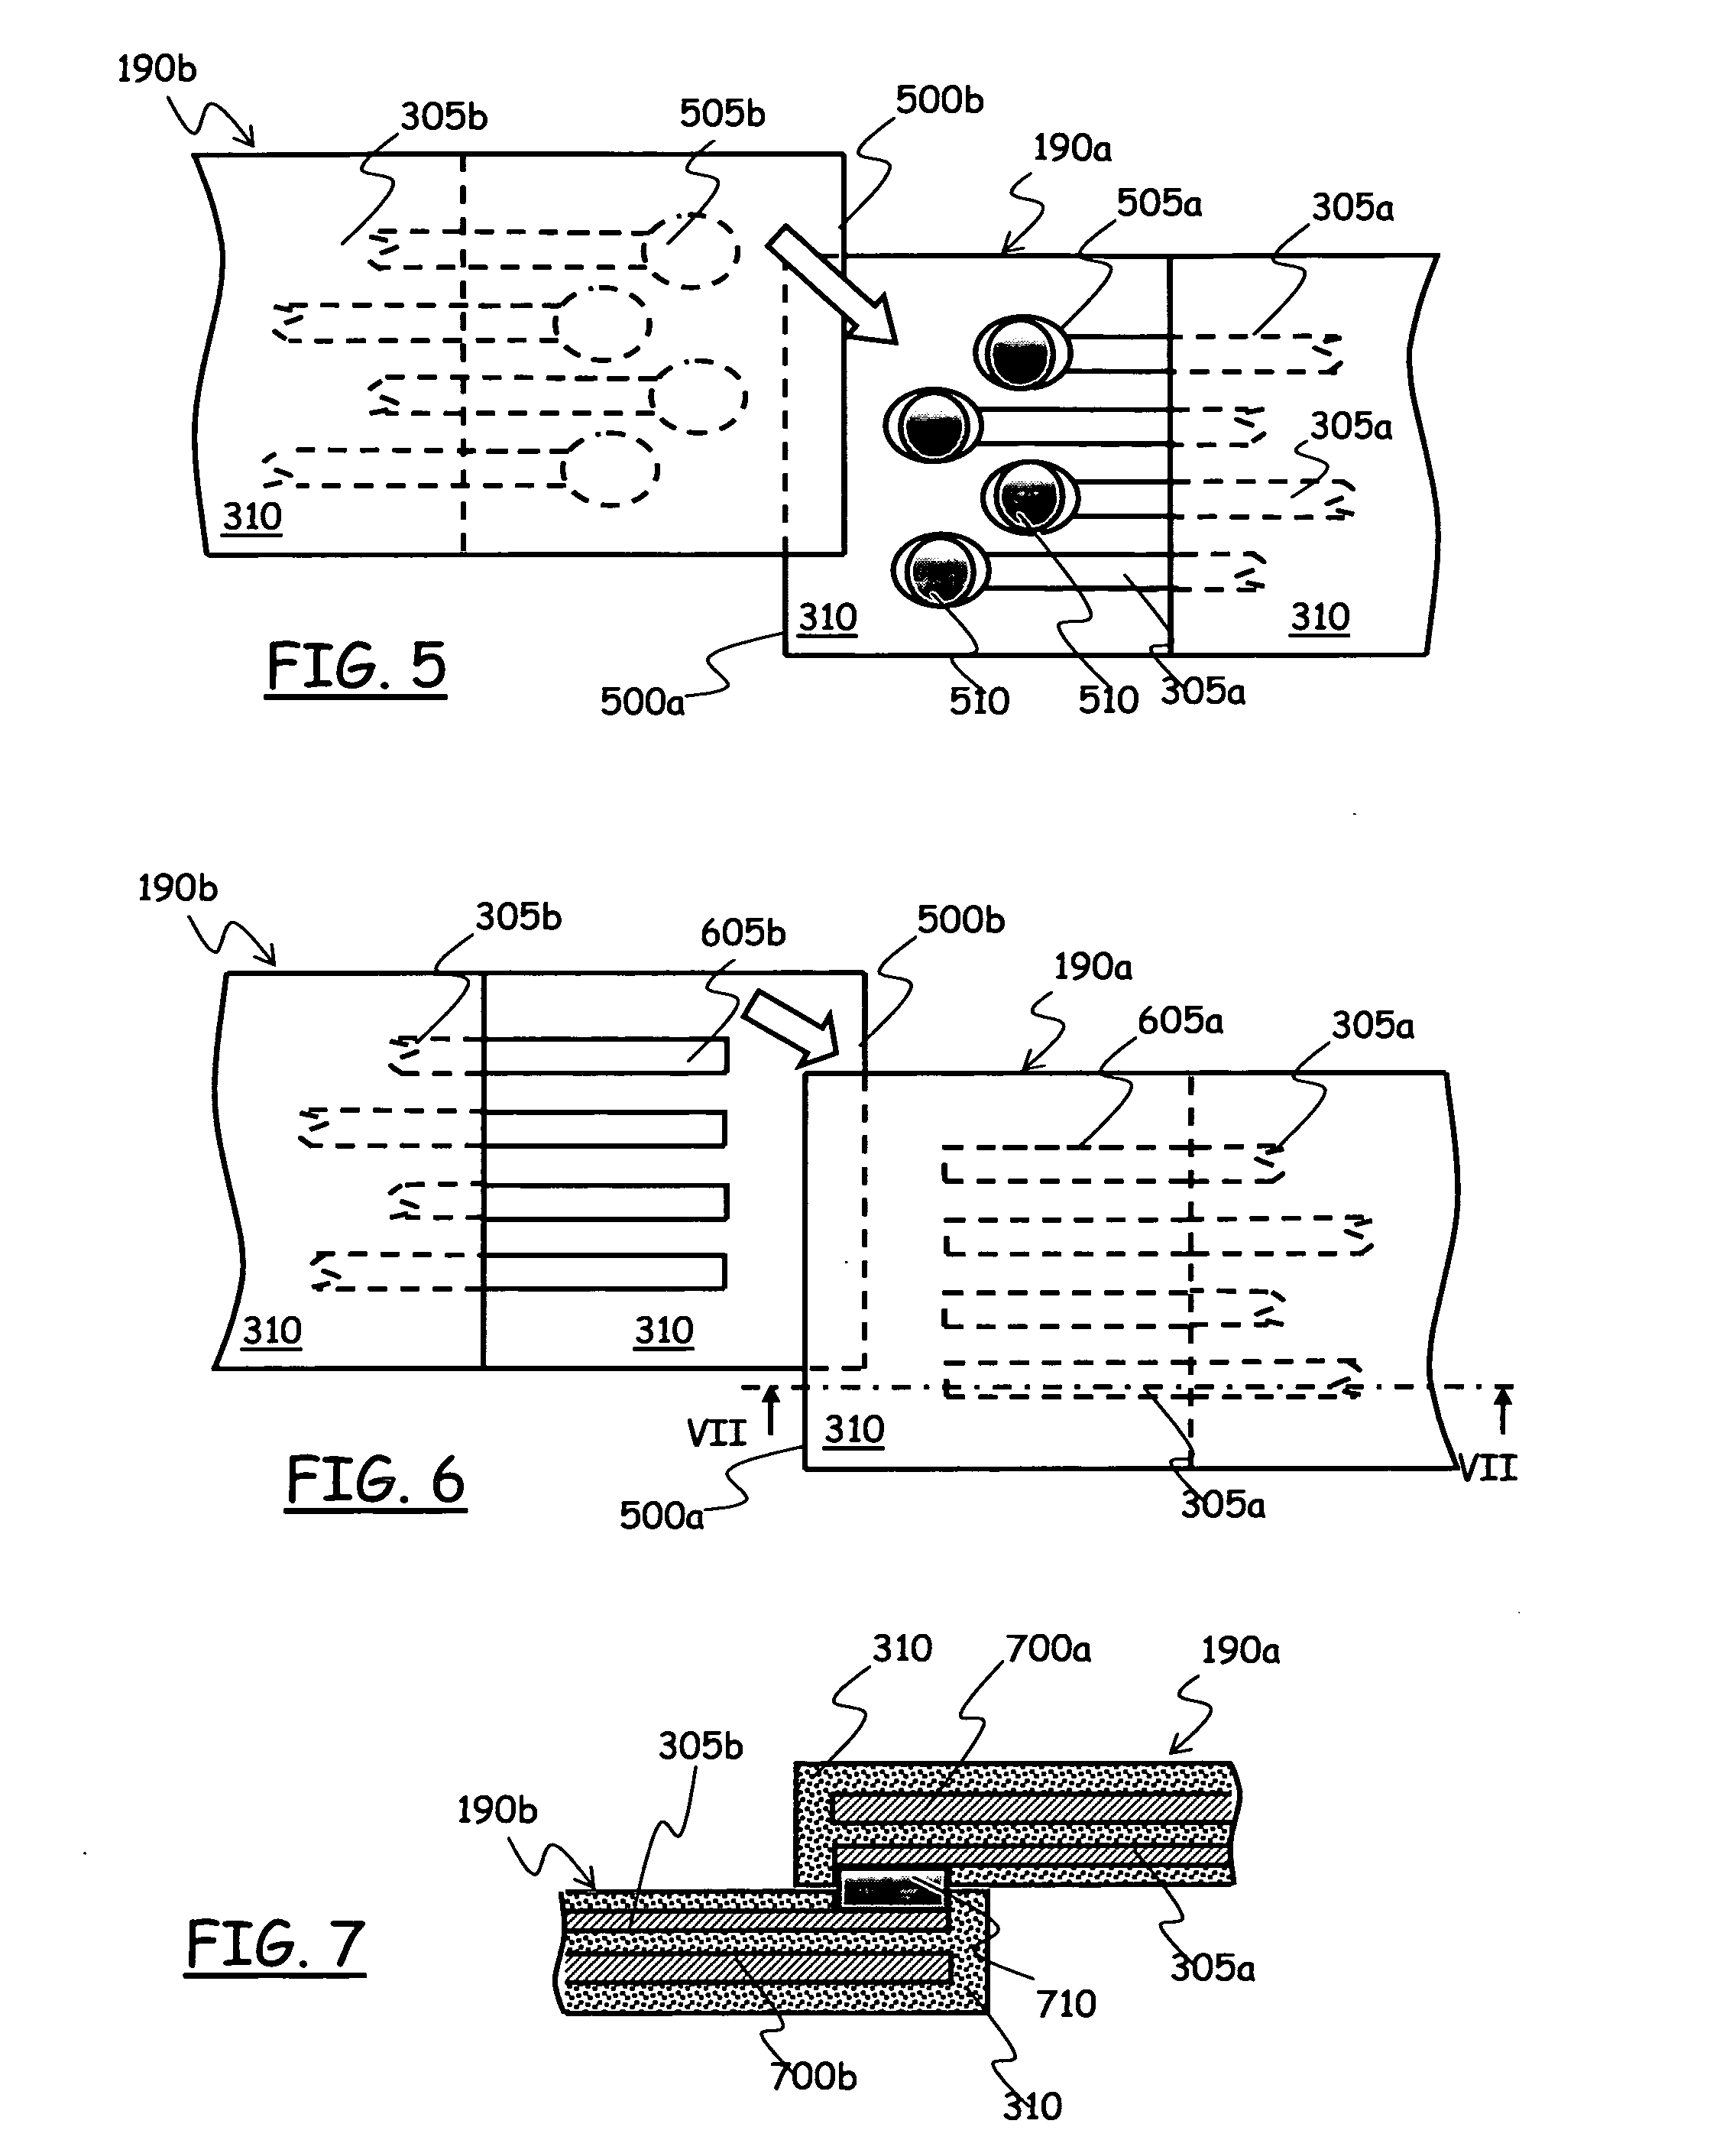 Method of assembling electronic components of an electronic system, and system thus obtained